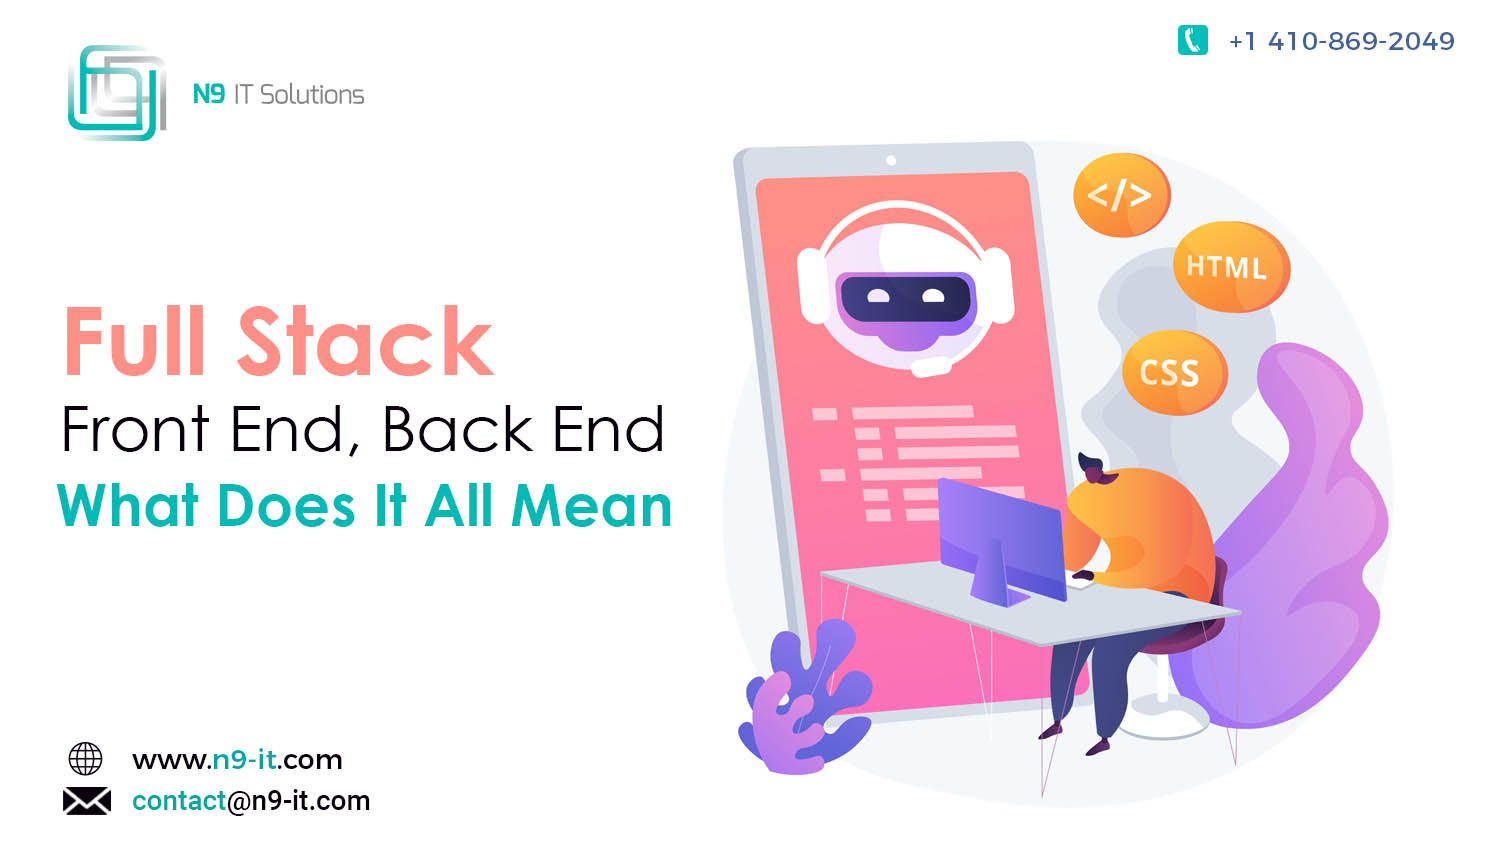 Full Stack, Front End, Back End—What Does It All Mean